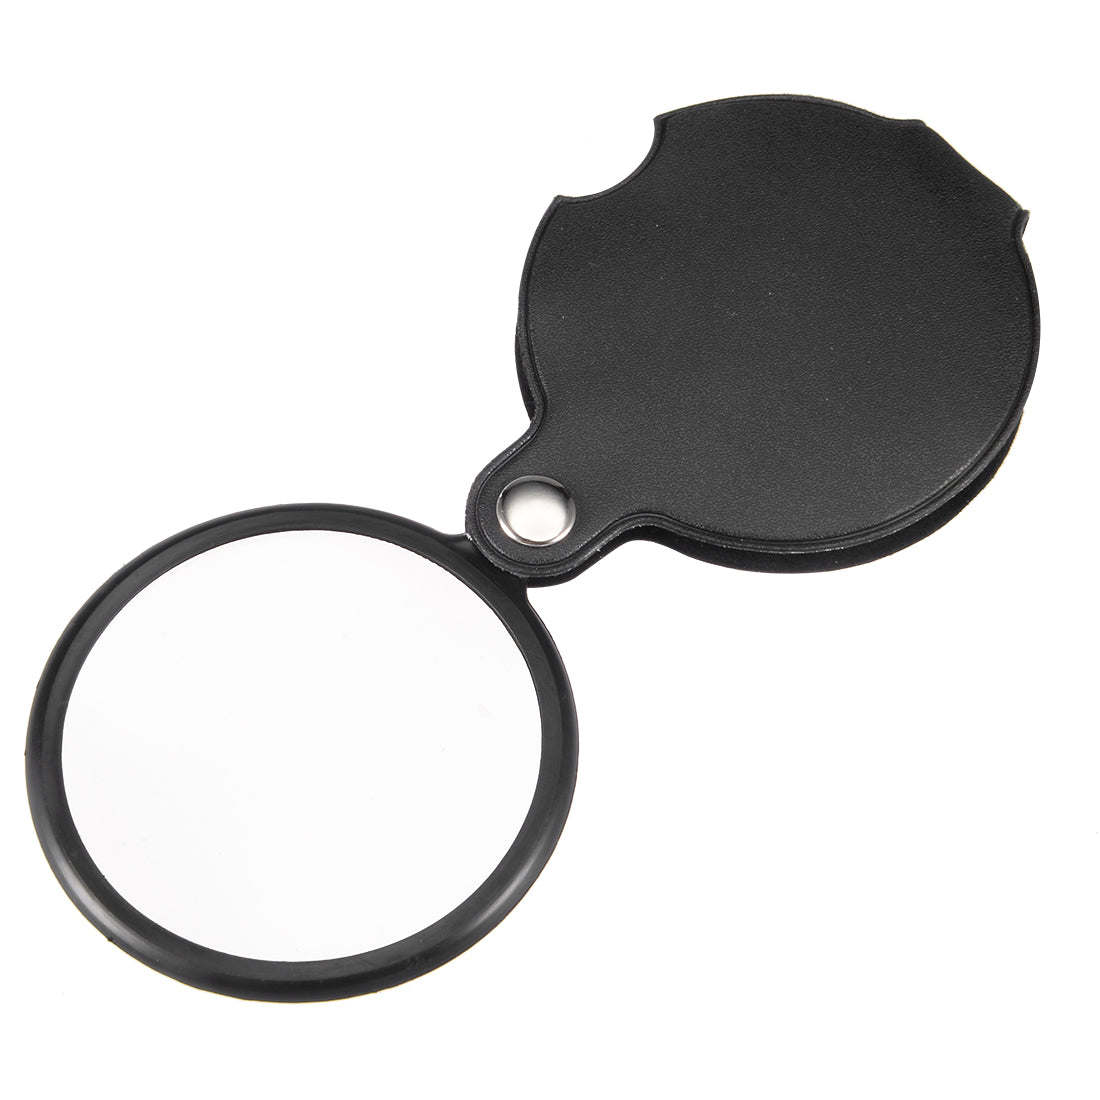 uxcell Uxcell 60mm 5X Pocket Folding Magnifier Loupe Magnifying Glass with Leather Case (Black)